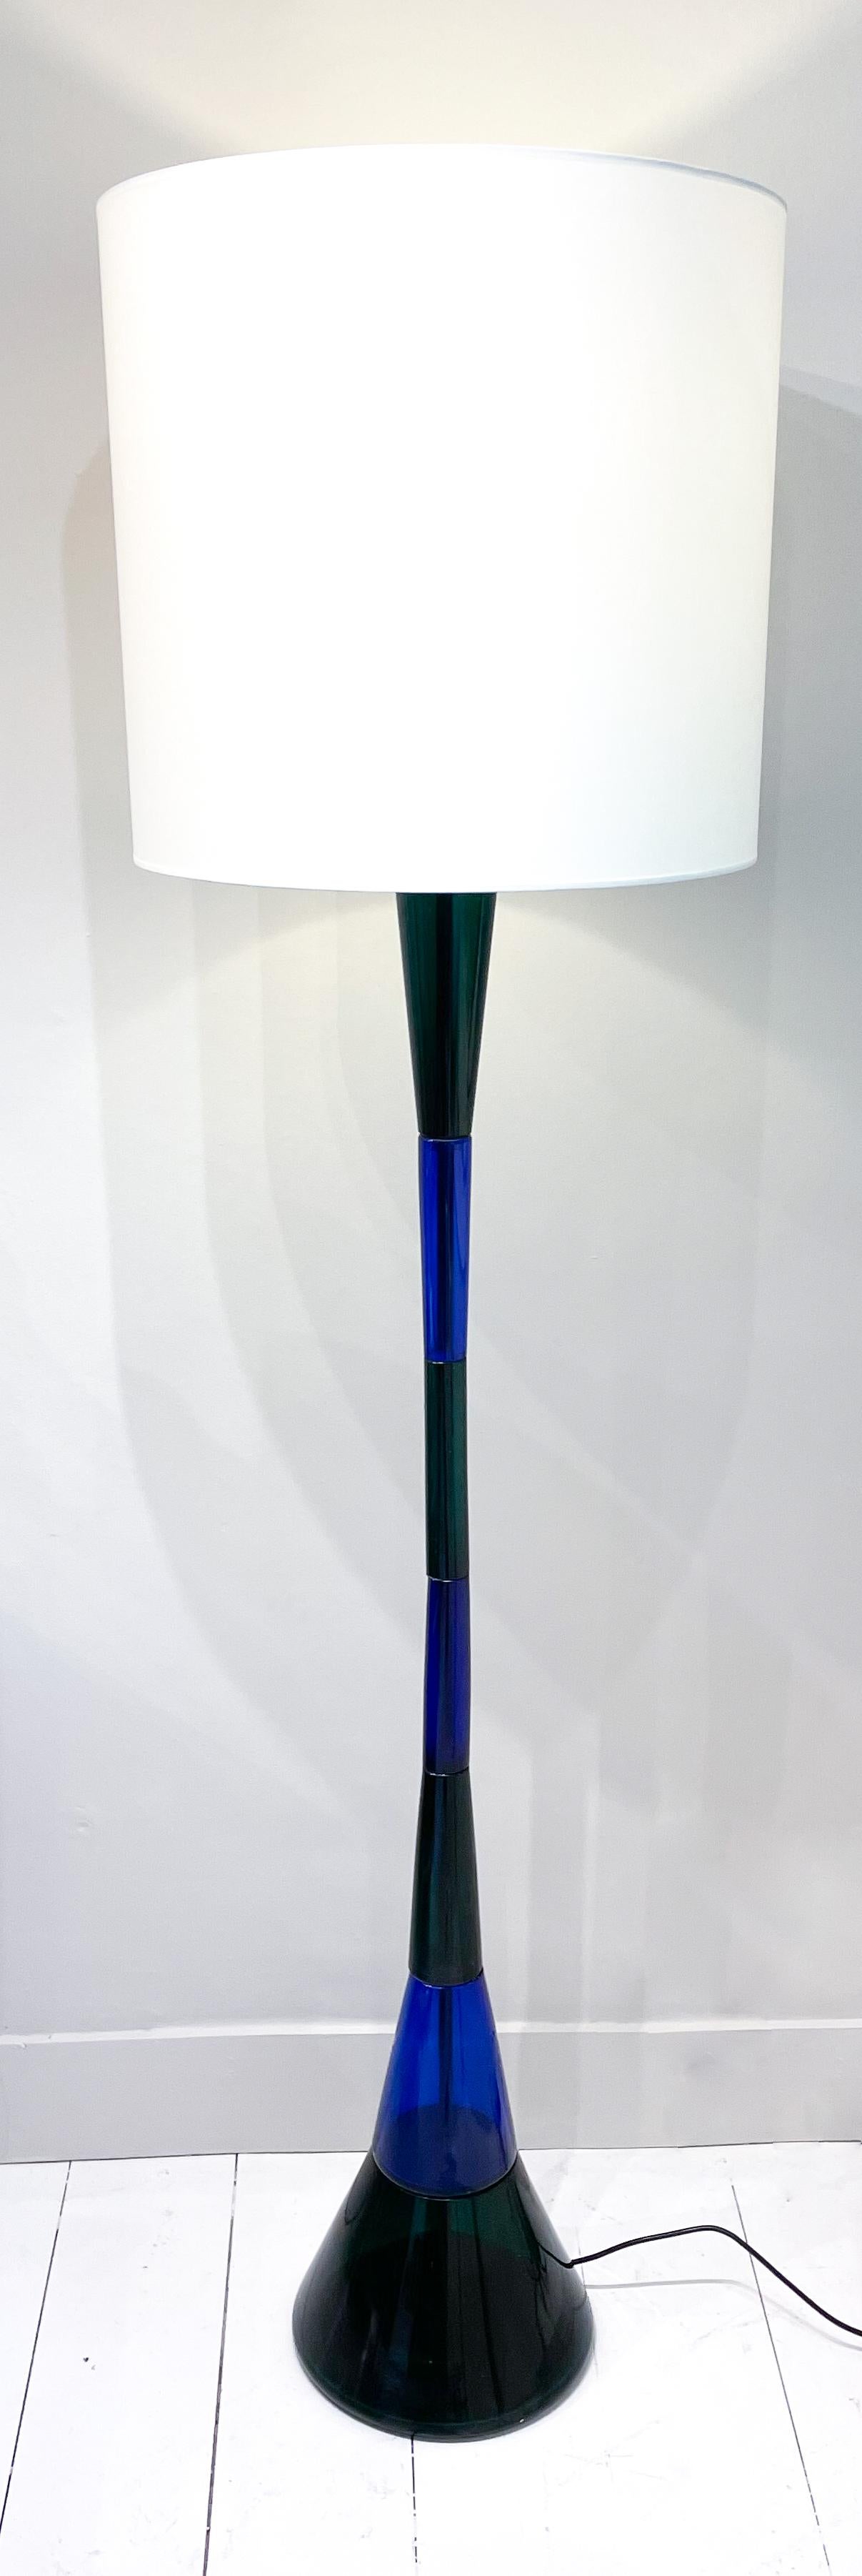 Mid-Century Blue and Green Murano Glass Floor lamp by Fulvio Bianconi, 1950s For Sale 5